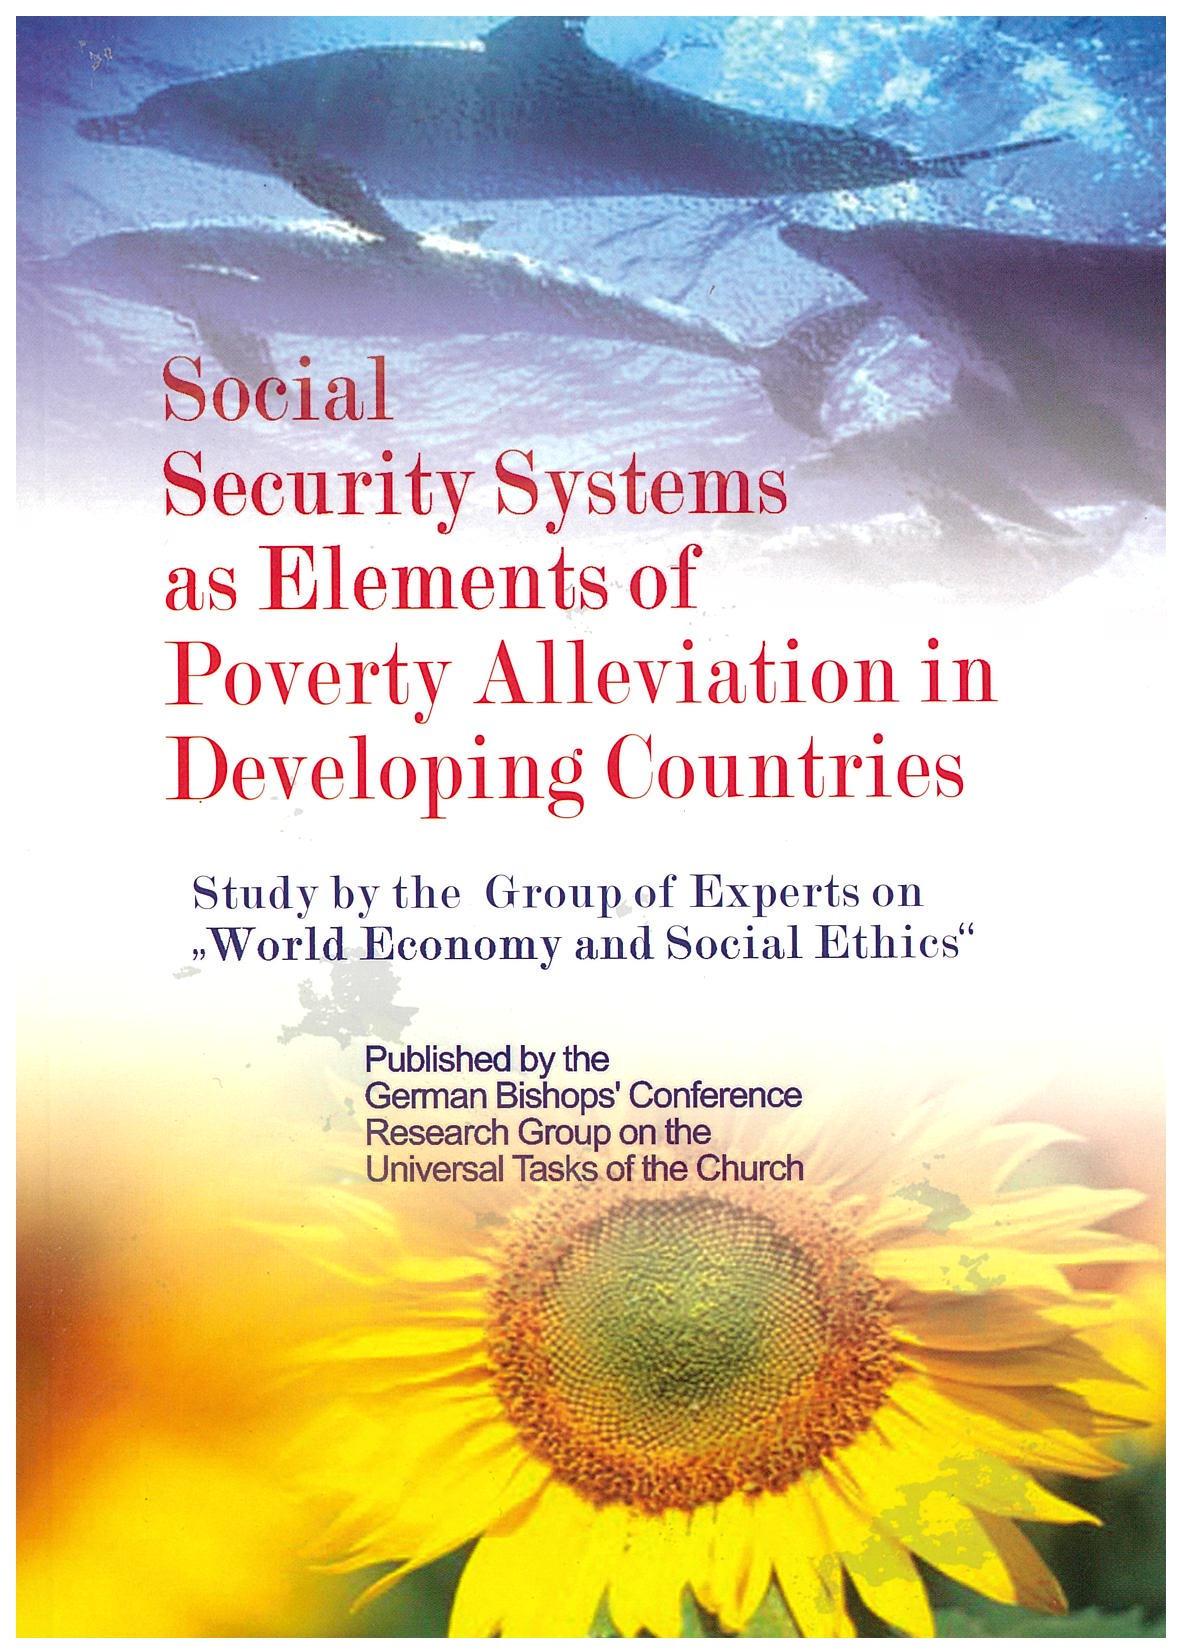 Social Security Systems as Elements of Poverty Alleviation in Developing Countries